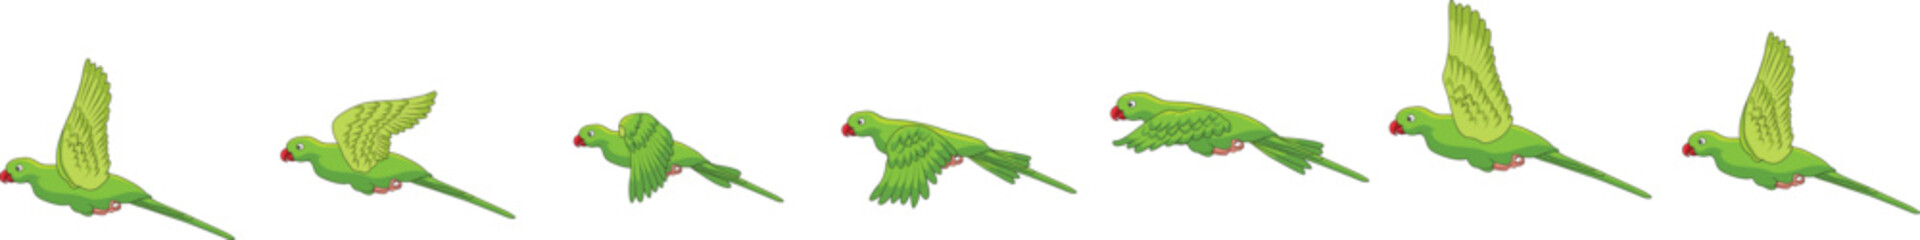 A group of parrots flying